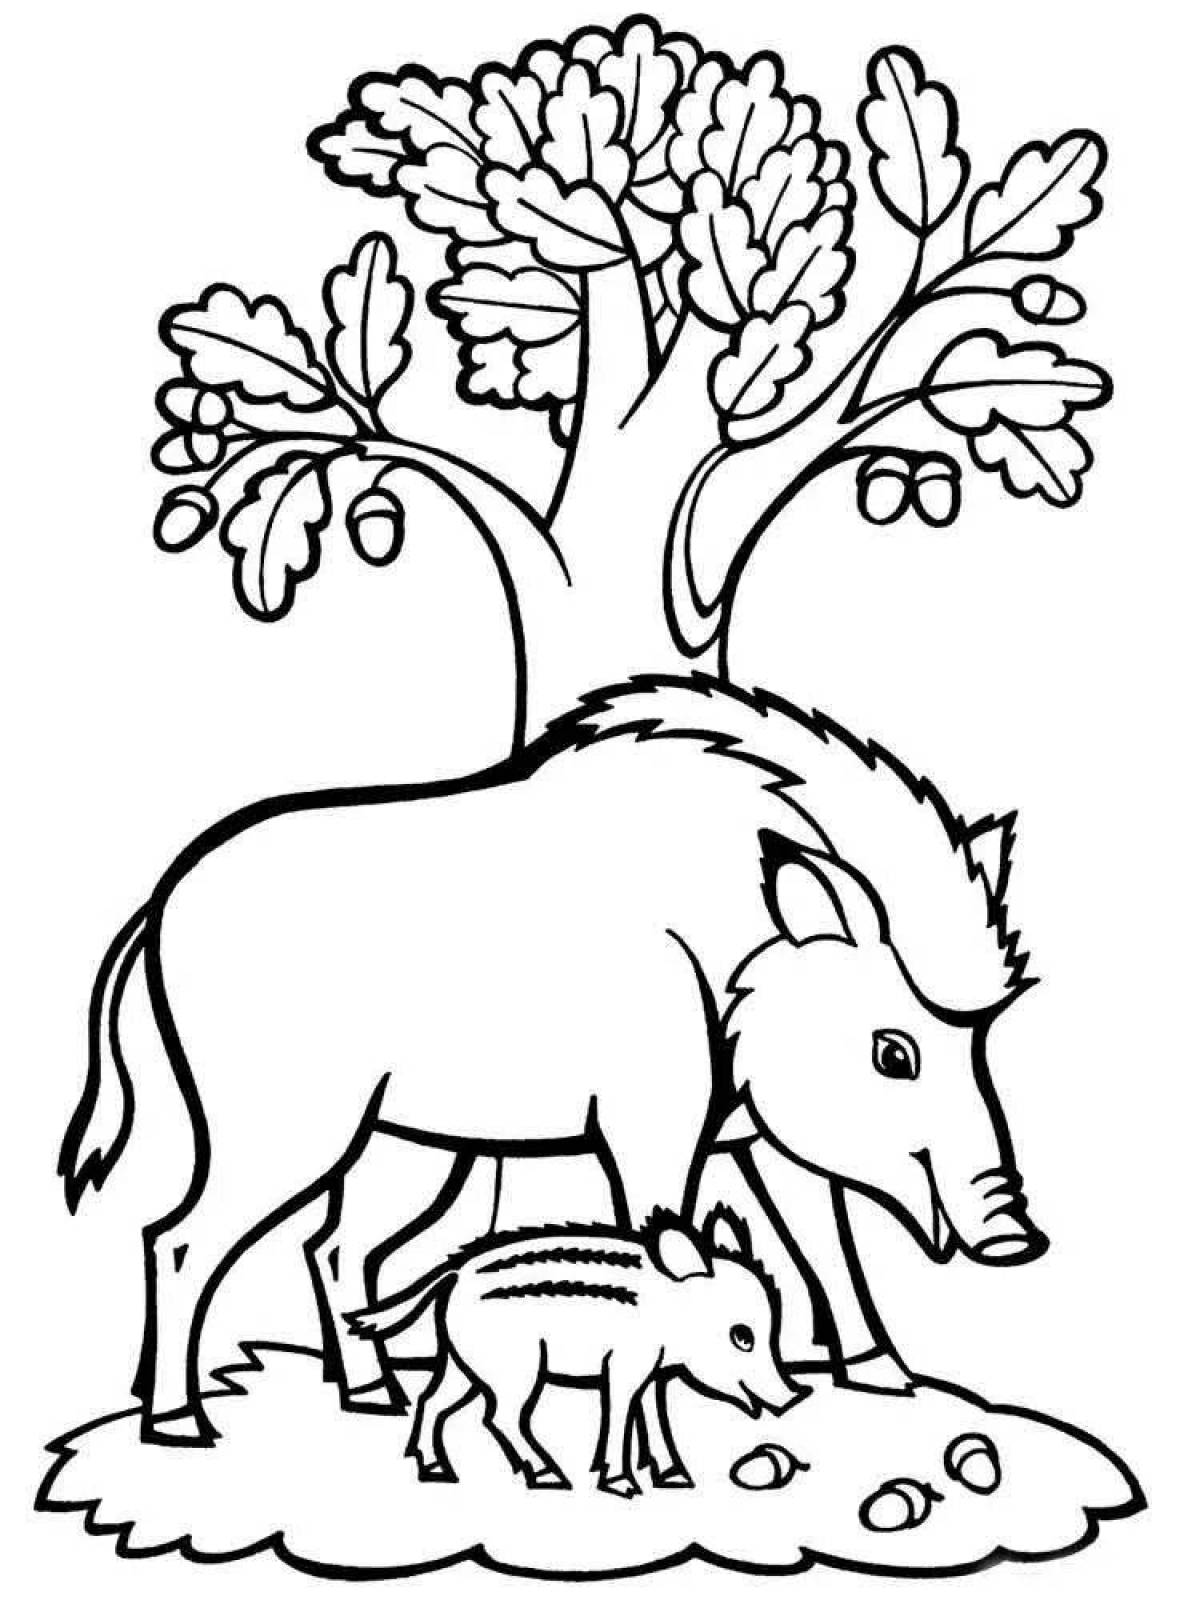 Living forest animal coloring page